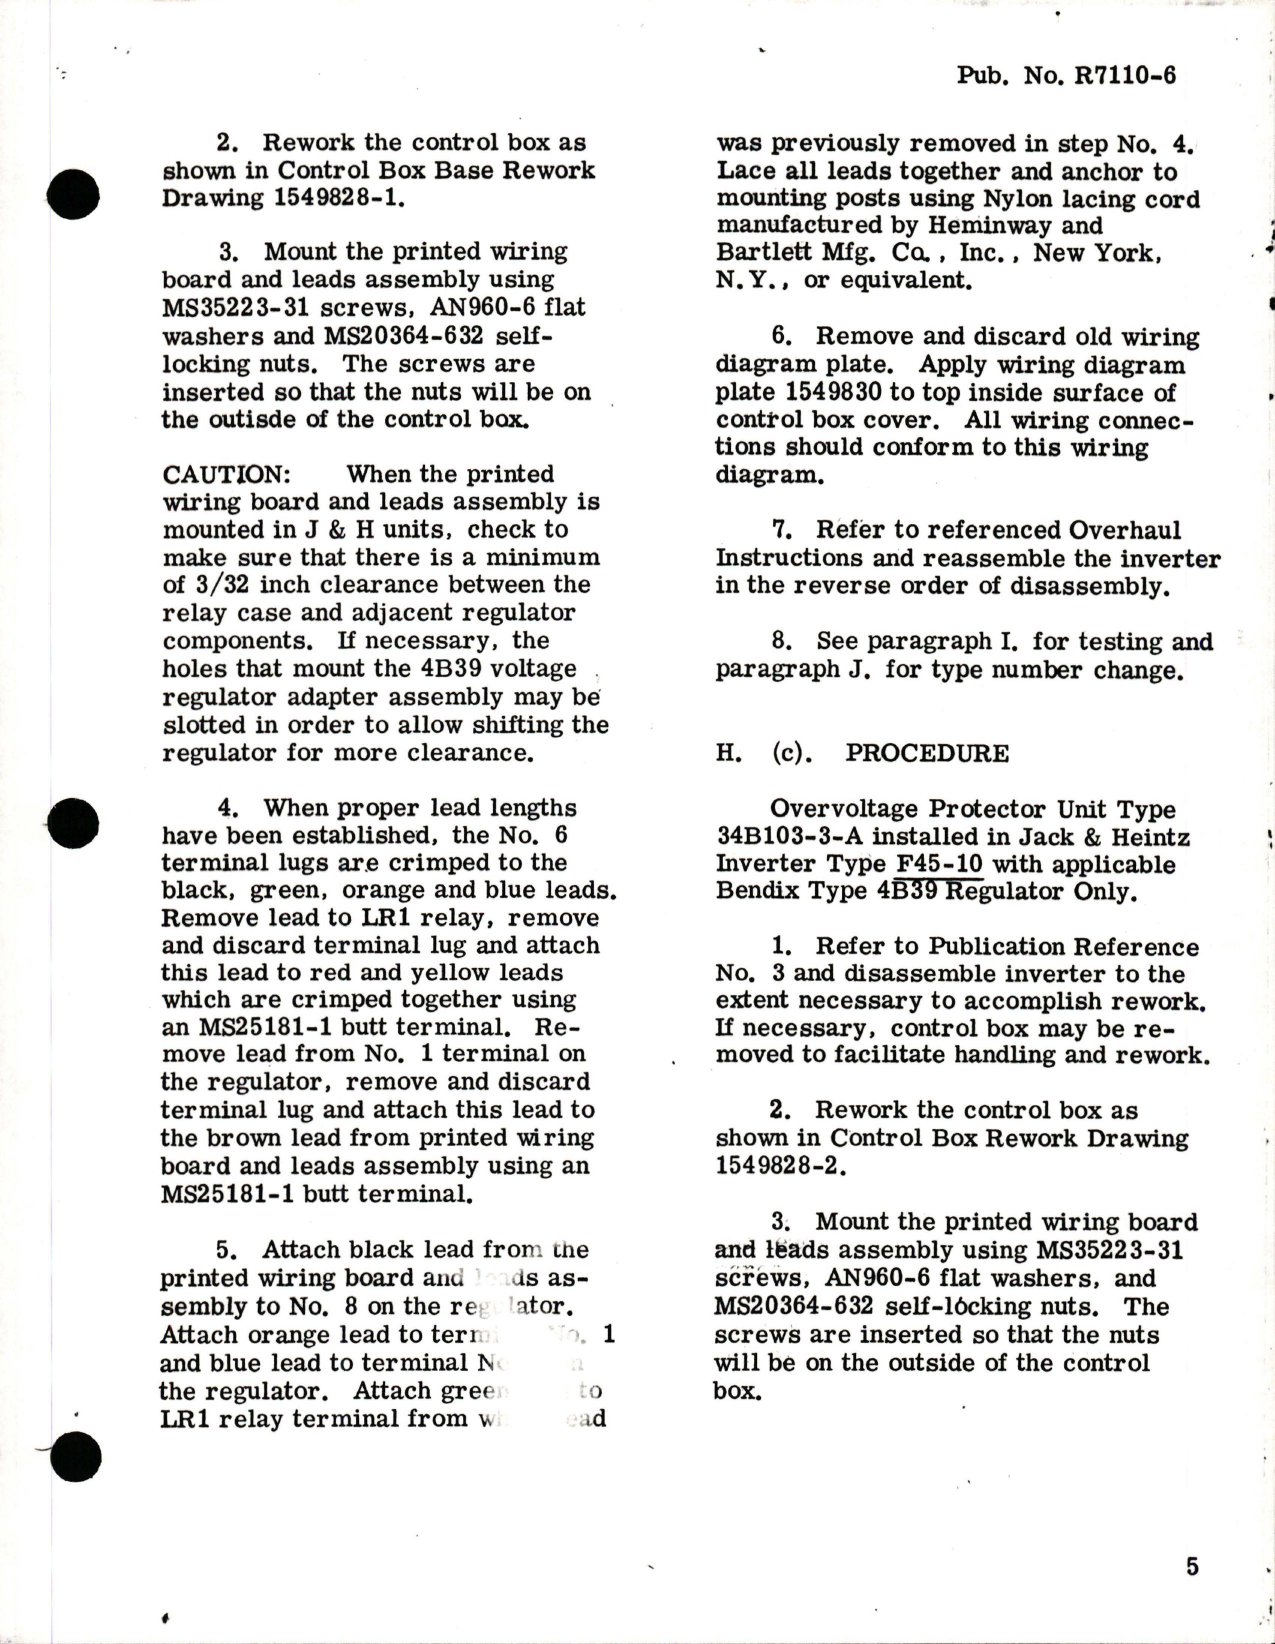 Sample page 5 from AirCorps Library document: Installation of Bendix Types 34B103-1A, 34B103-2-A, 34B103-3-A, 34B103-4-A, and 34B103-18-A Overvoltage Protector Unit for Electric Power Inverter